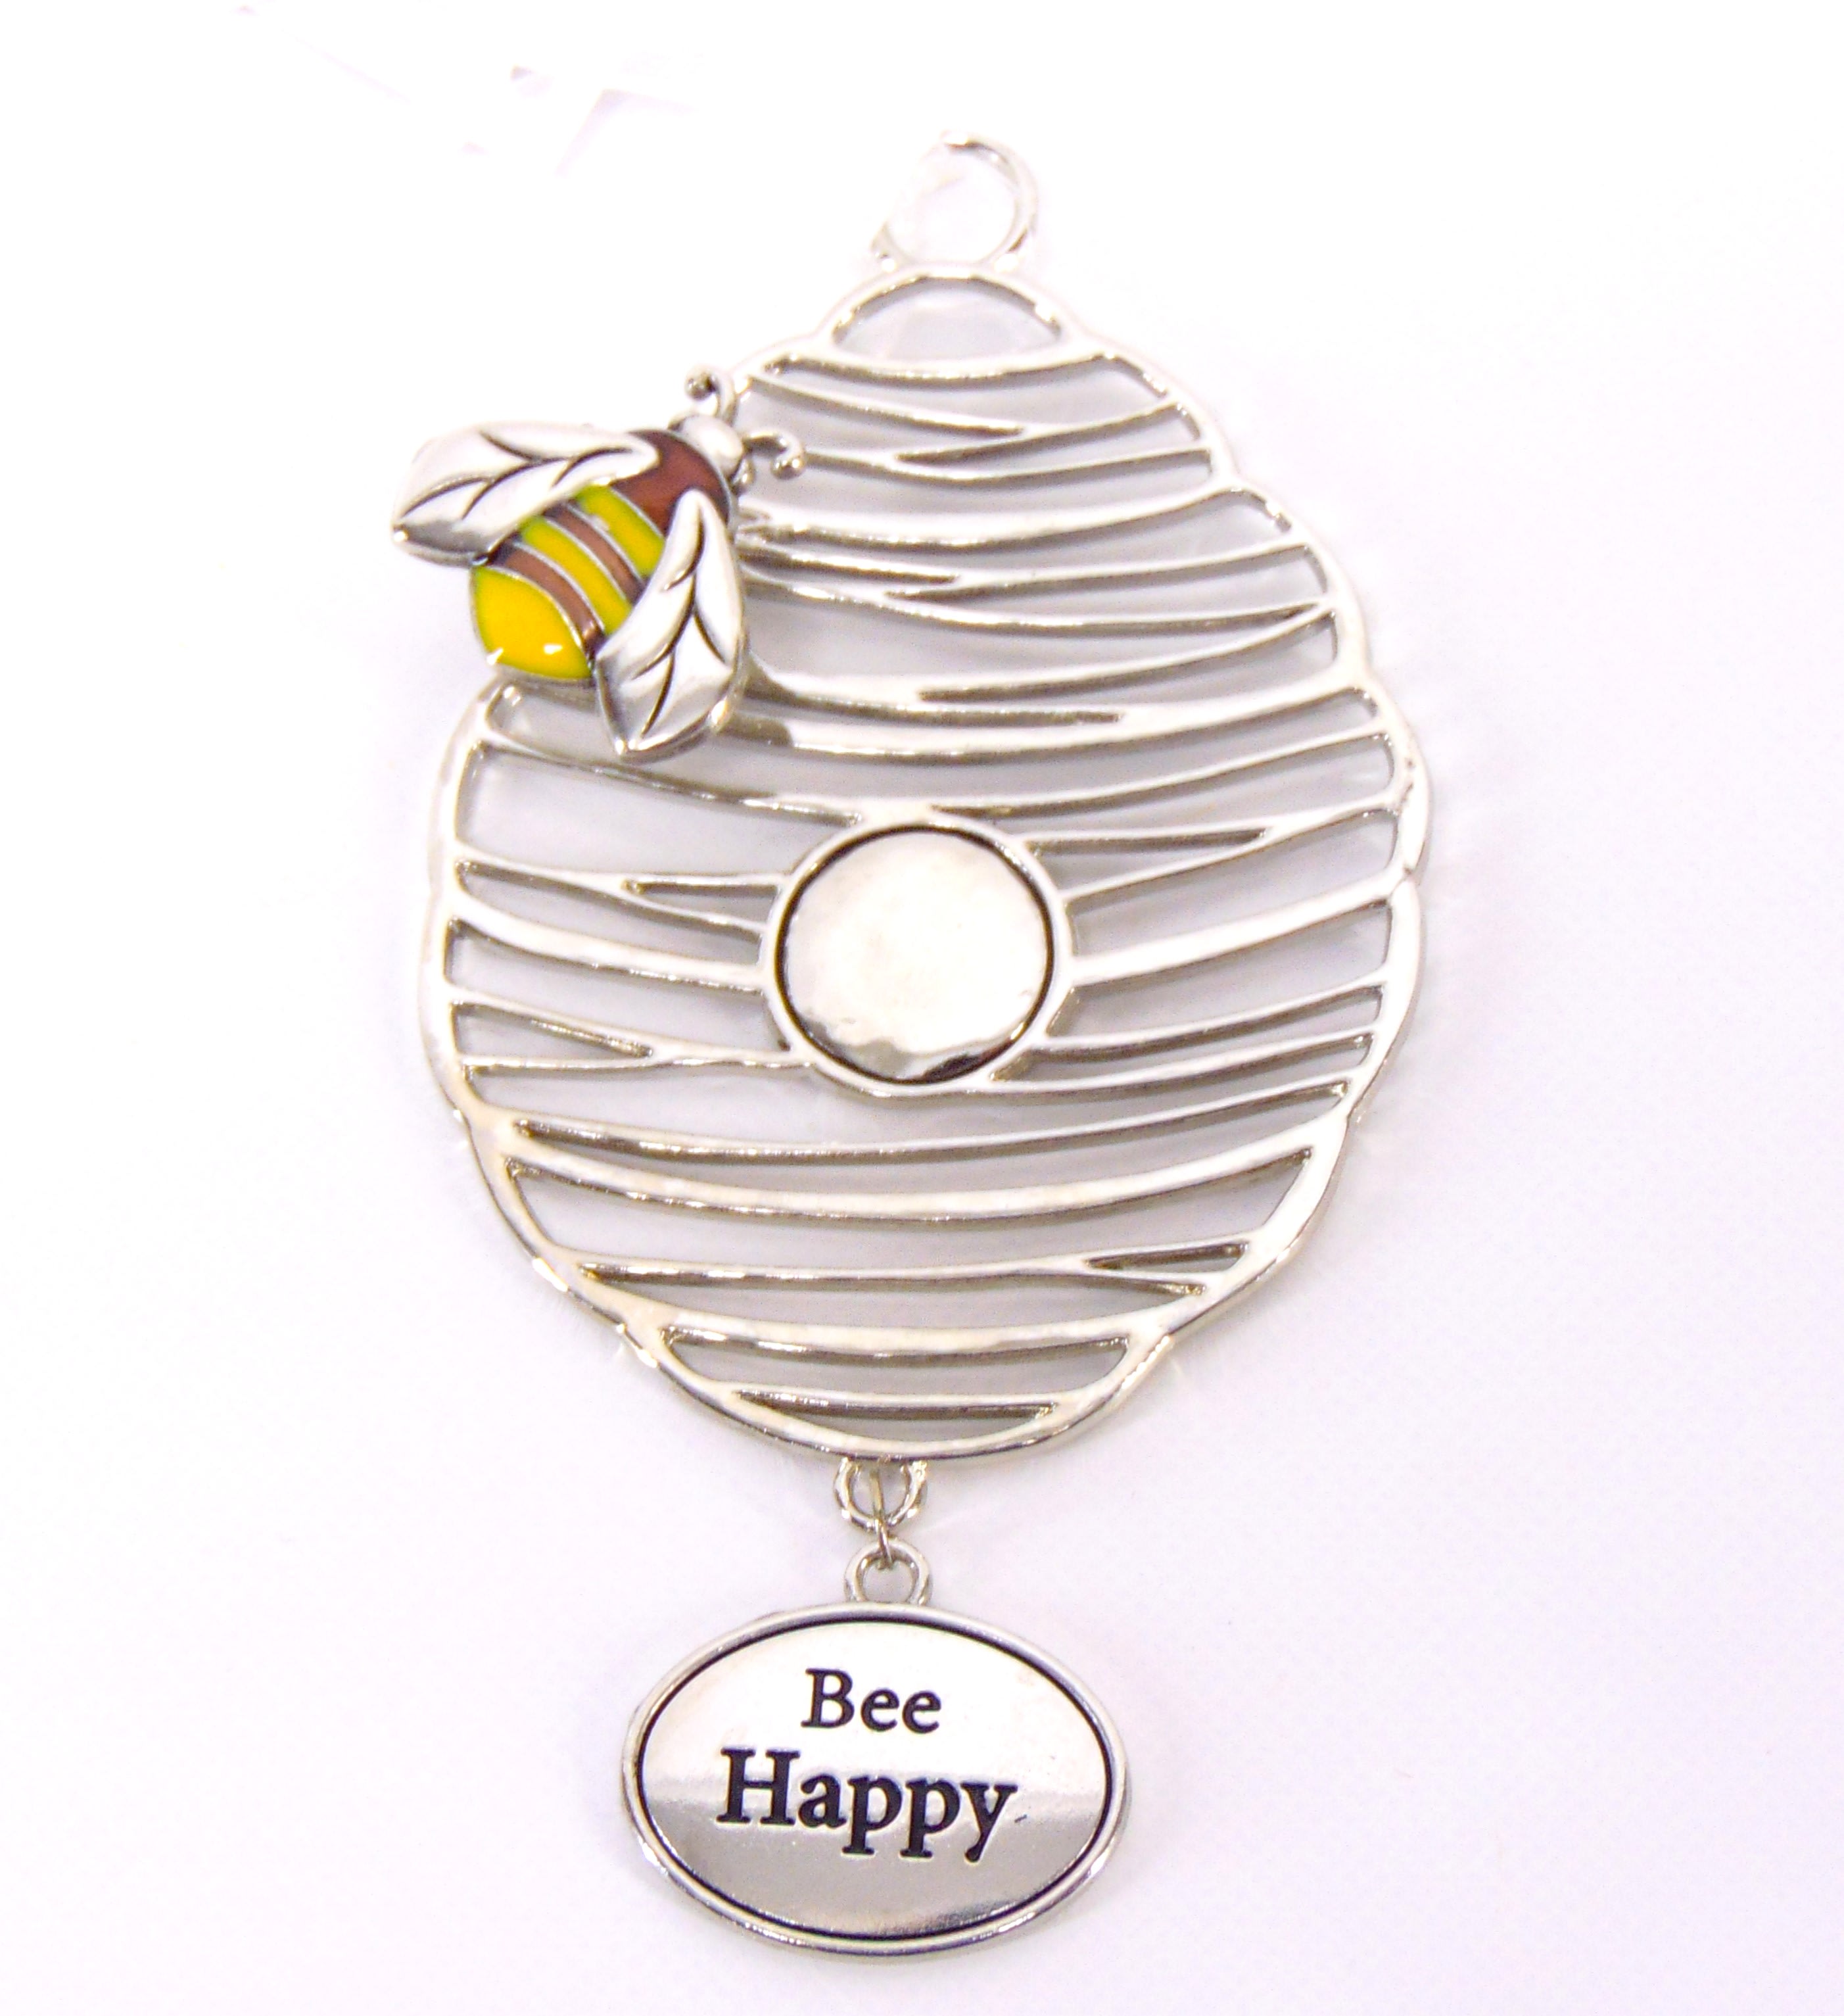 Bee Happy, Bee  Ornament - Bee Ornament by Ganz